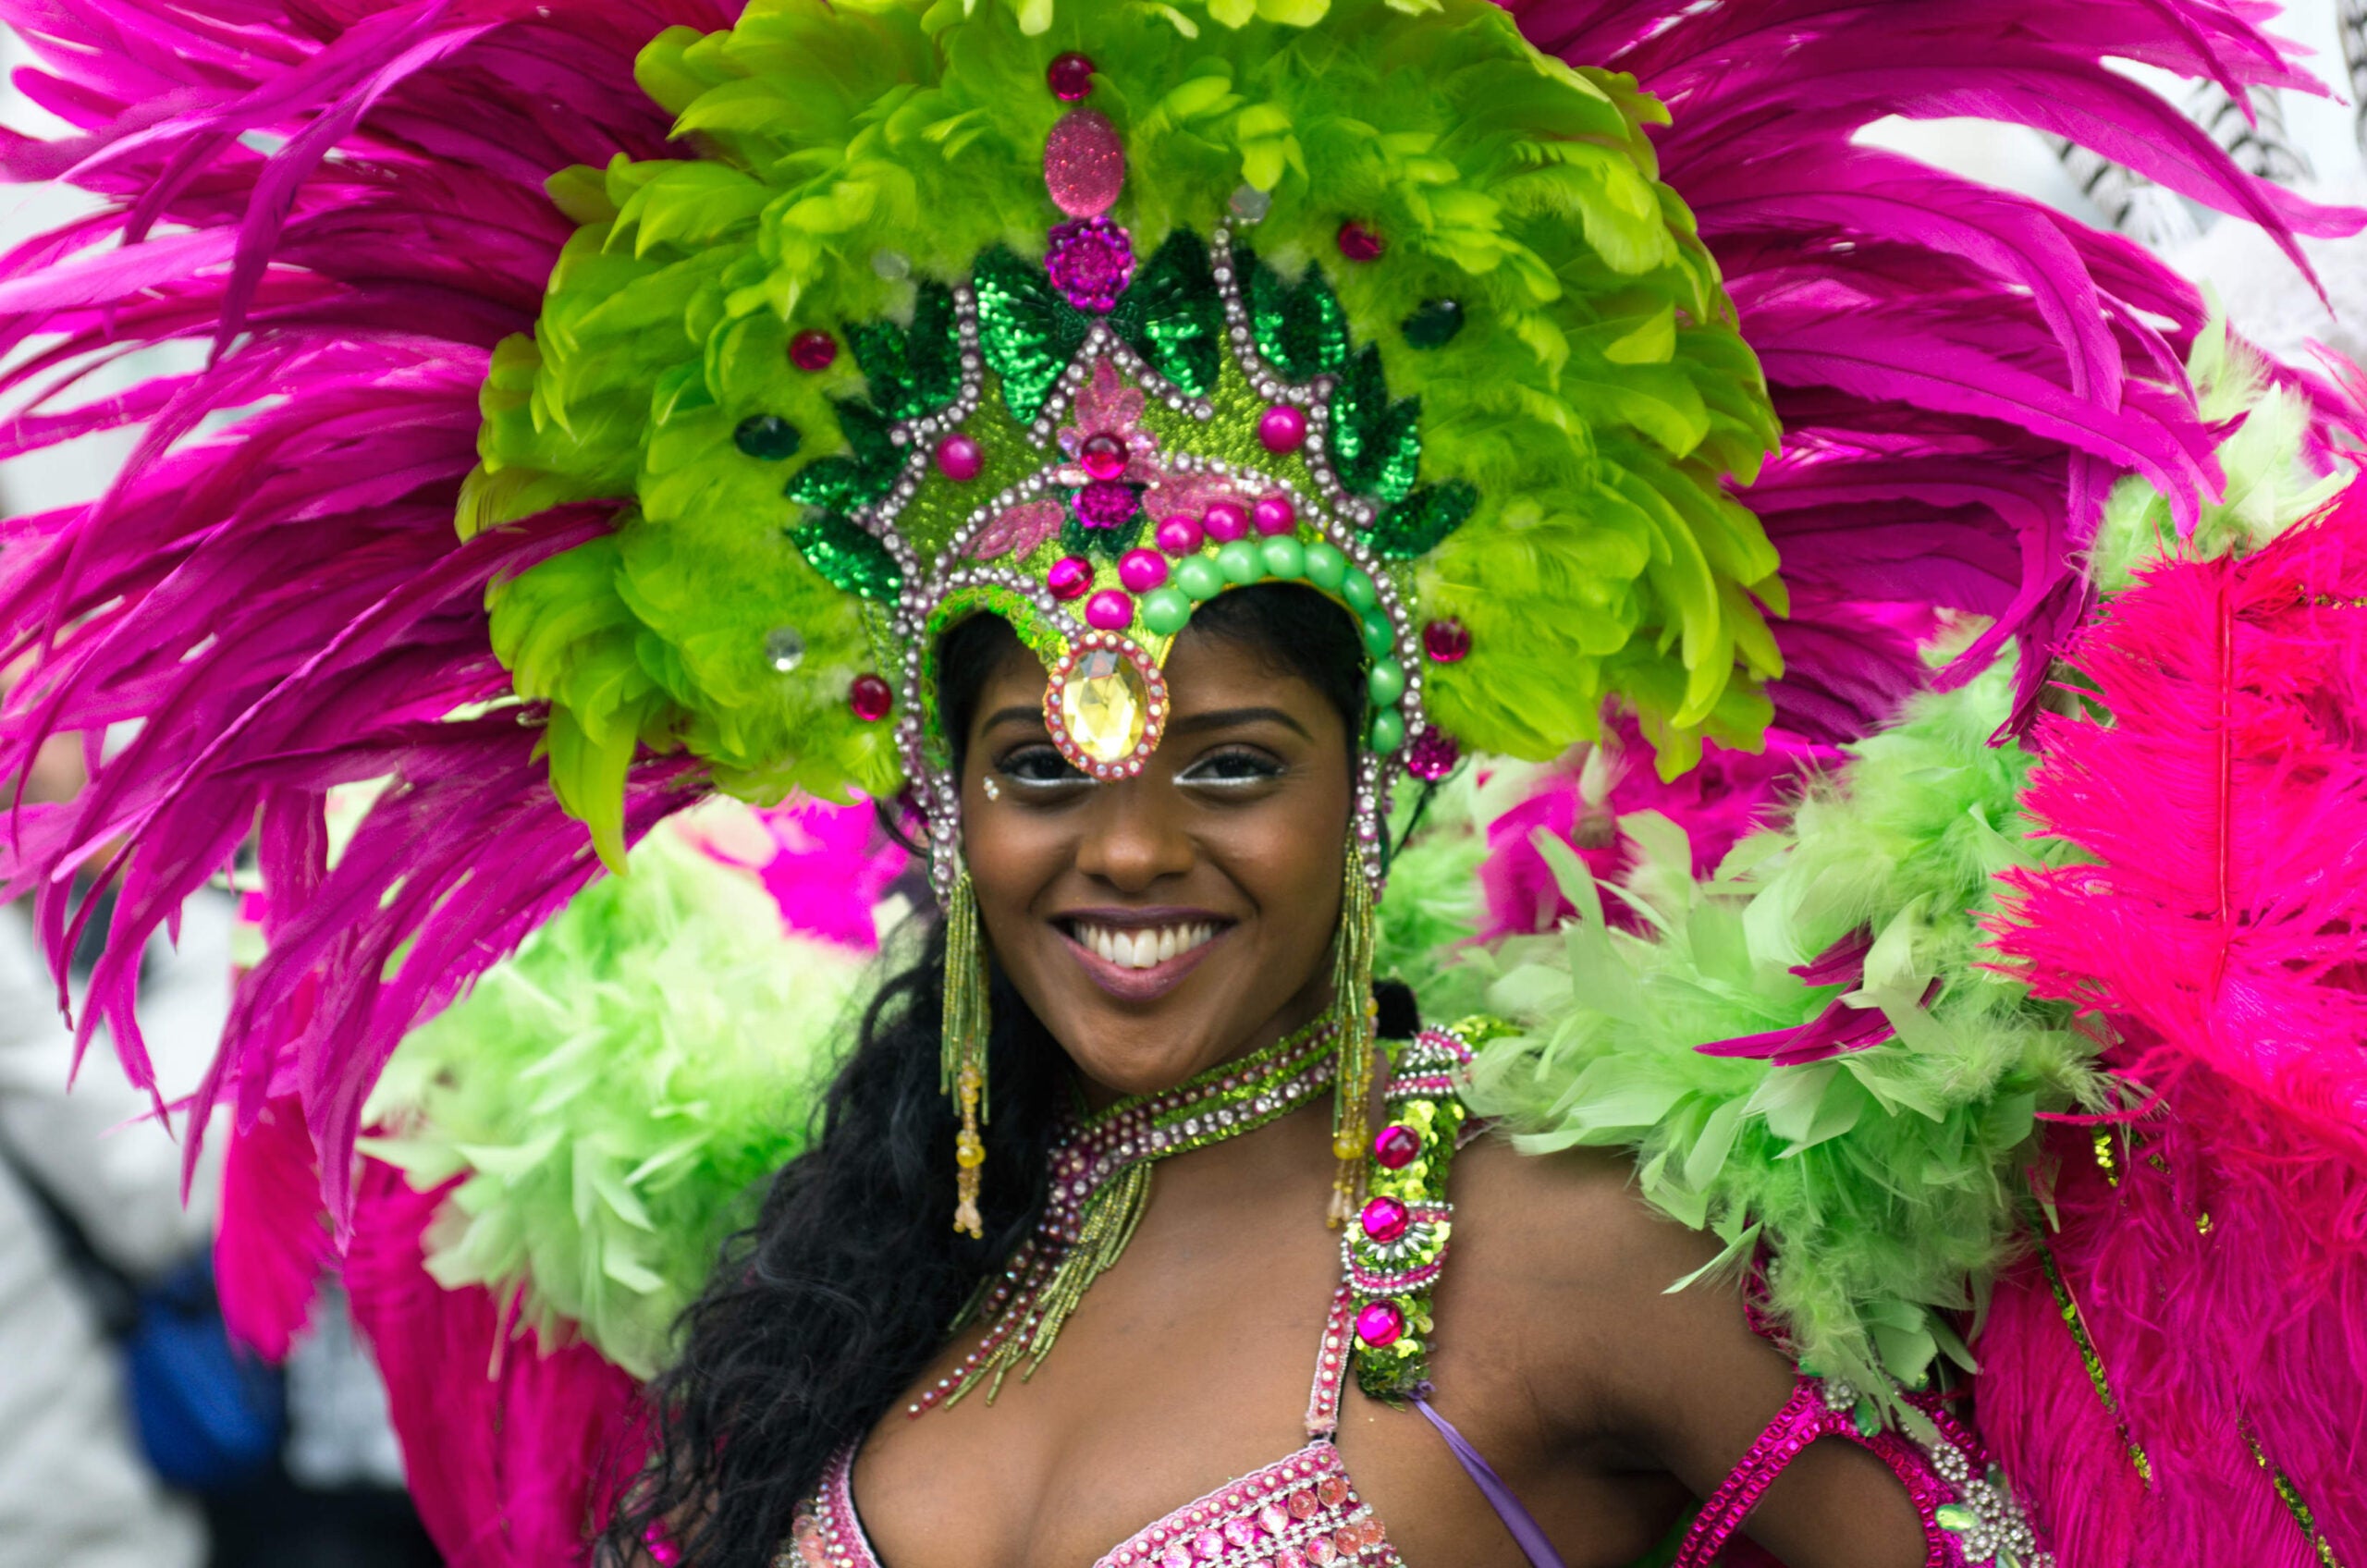 Notting Hill Carnival Schedule: Are you planning your visit? - Verdict